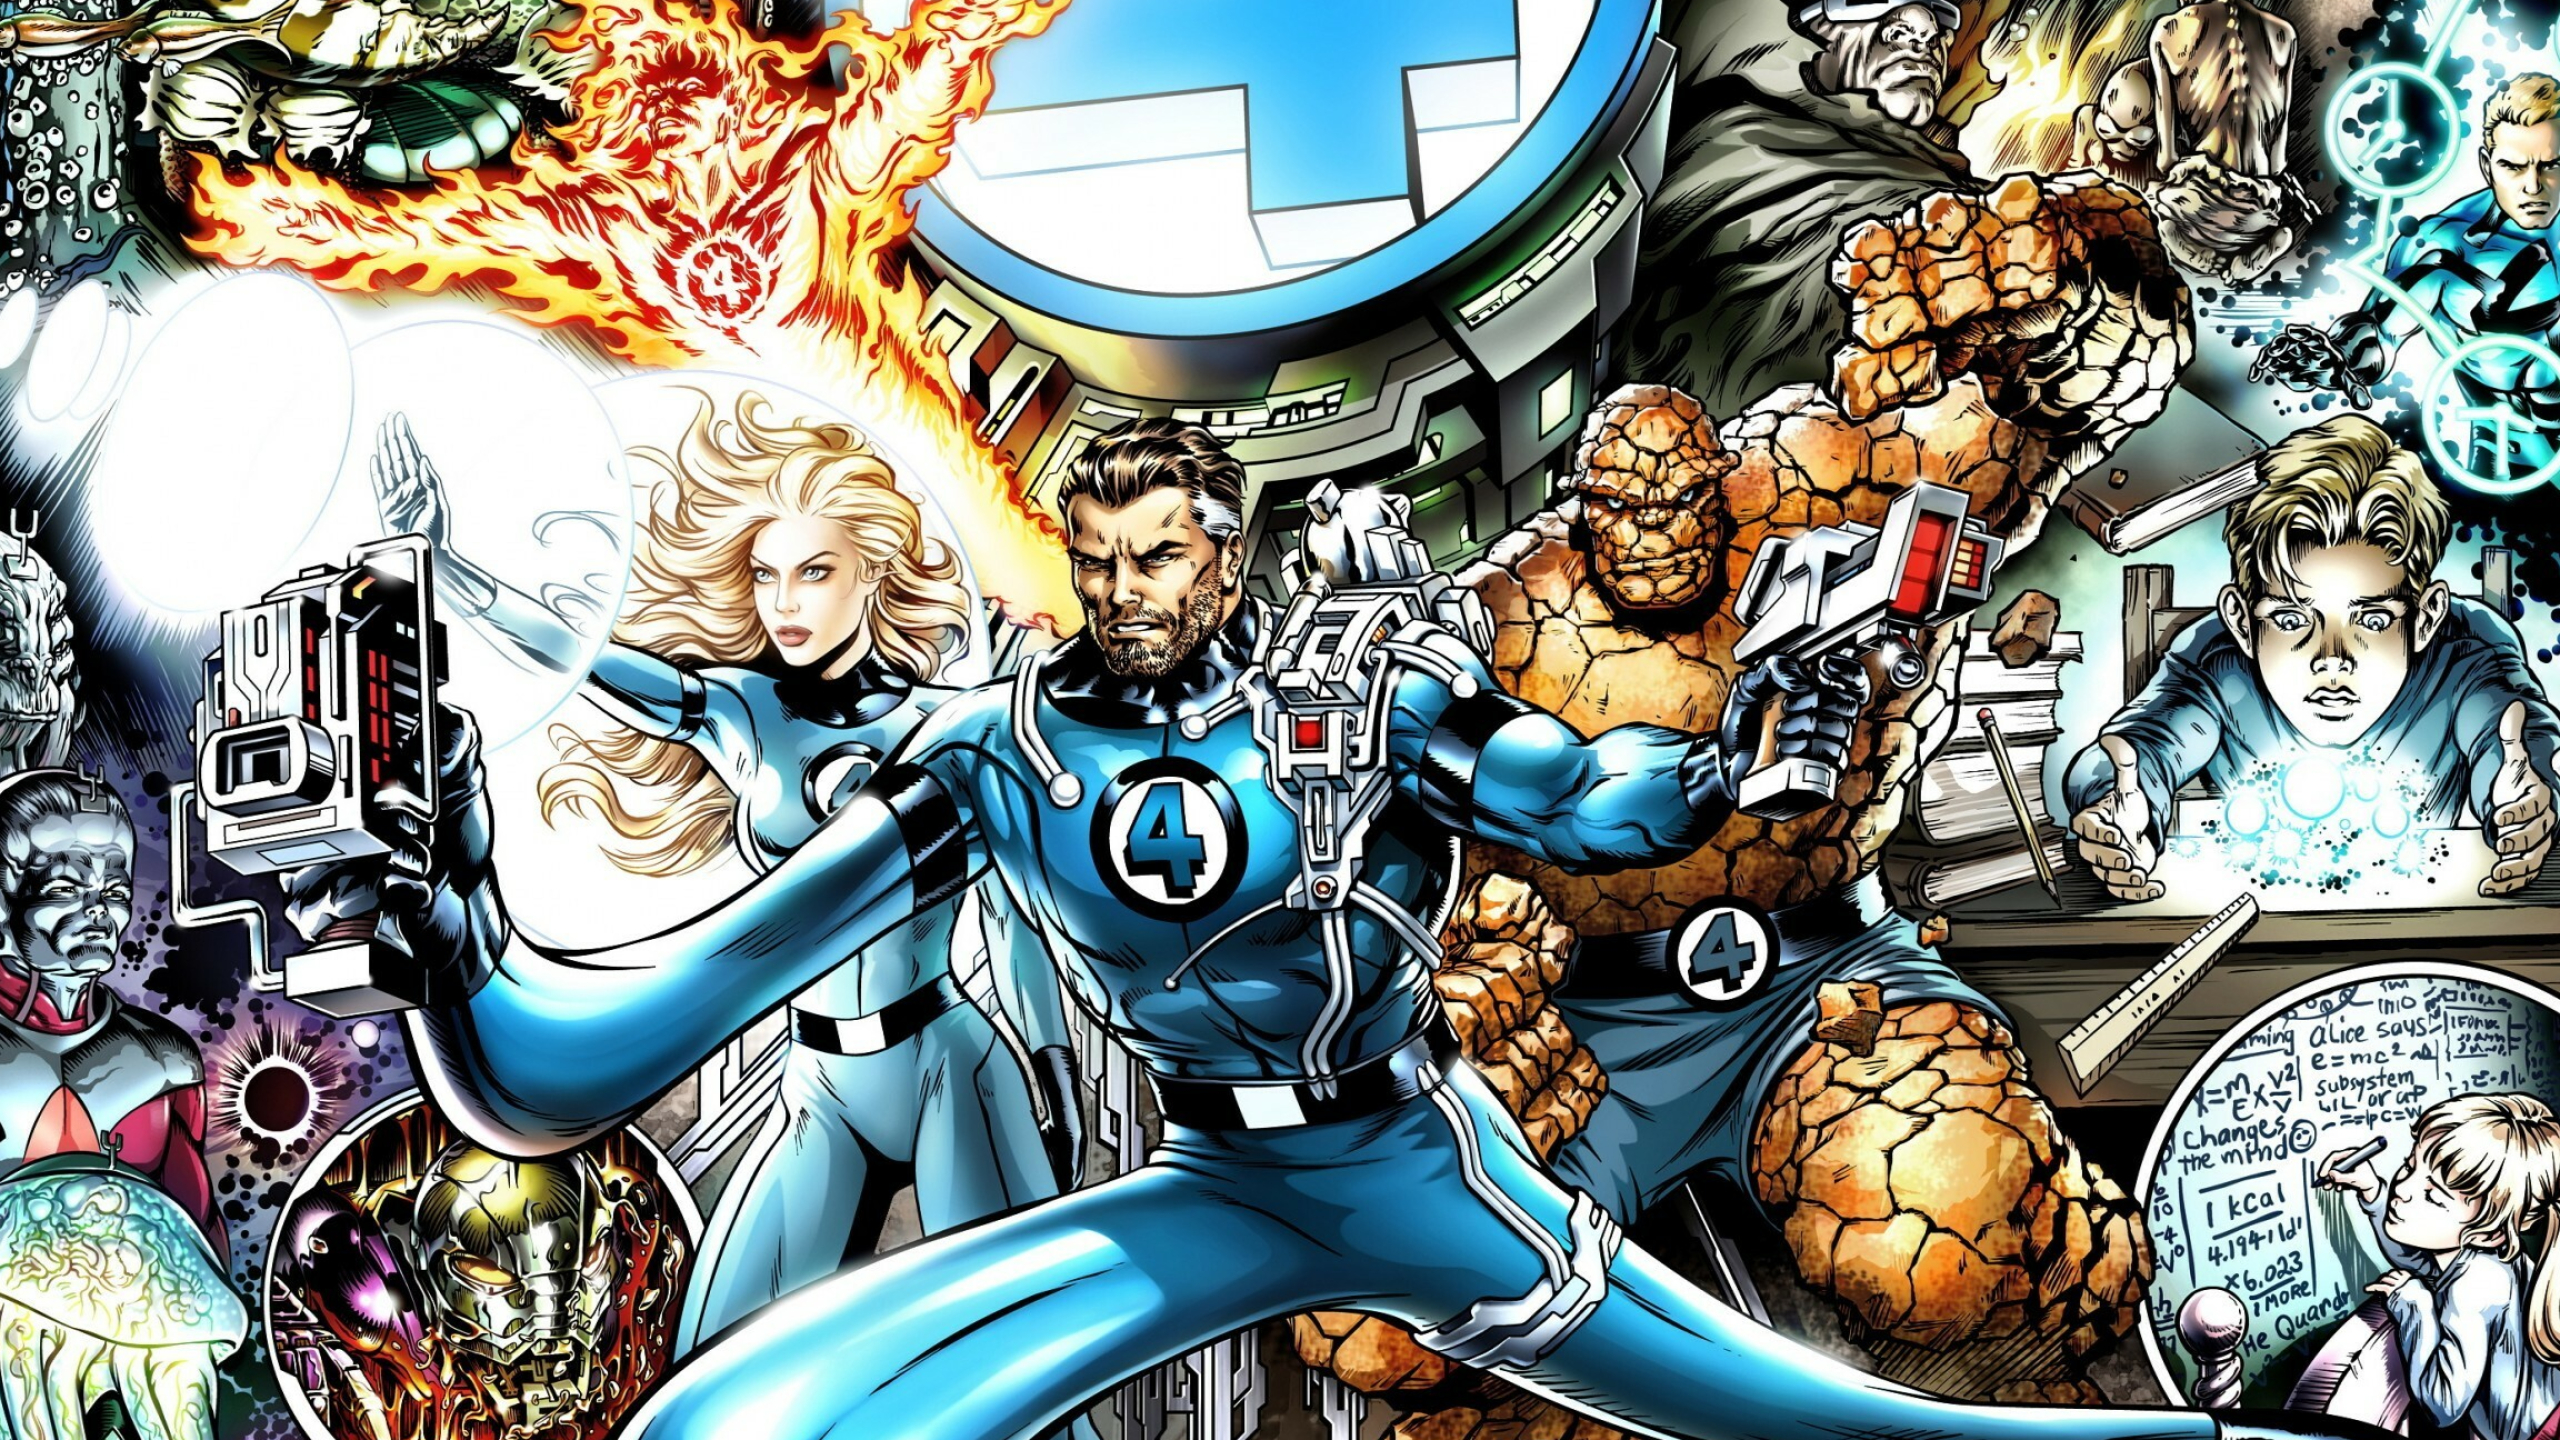 Fantastic 4: The four characters who gained superpowers after exposure to cosmic rays. 2560x1440 HD Background.